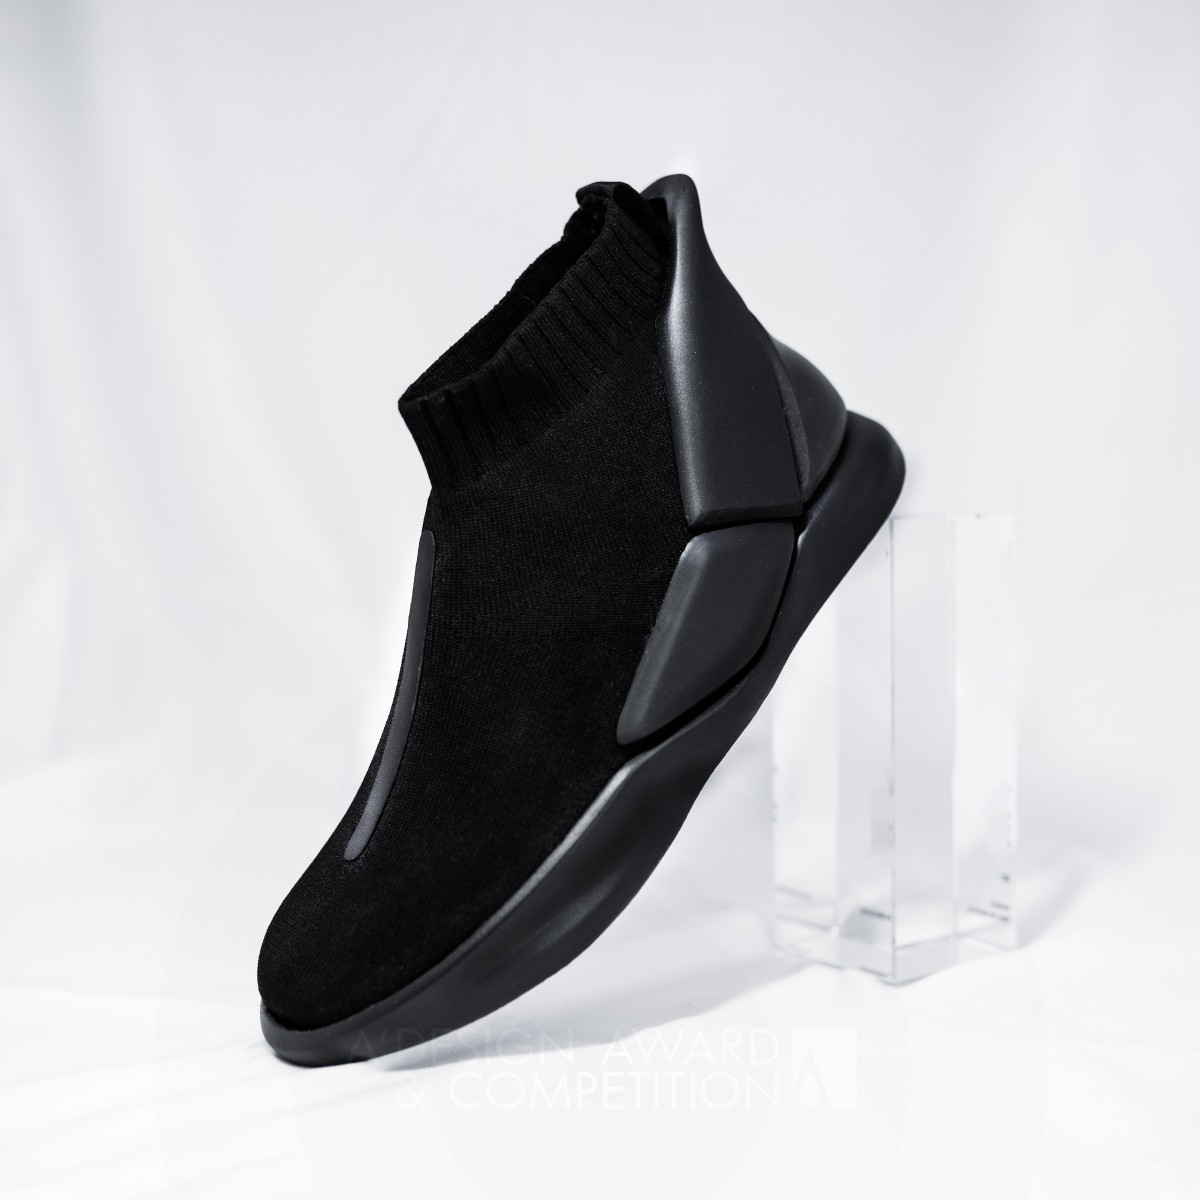 Hengbo Zhang wins Iron at the prestigious A' Footwear, Shoes and Boots Design Award with Adamas Shoes.